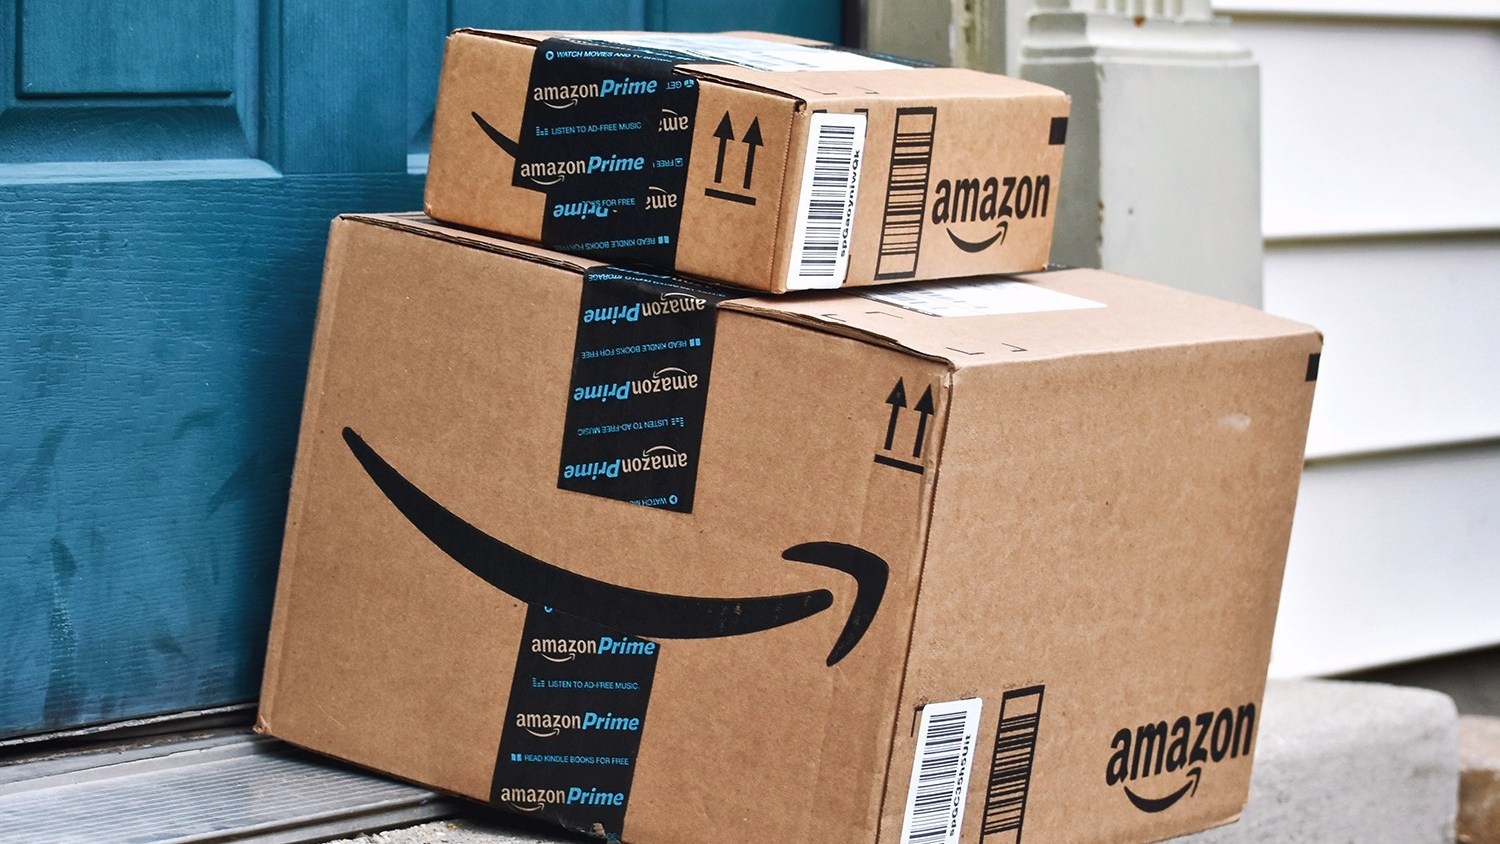 Amazon Prime Day 2018: All the best deals